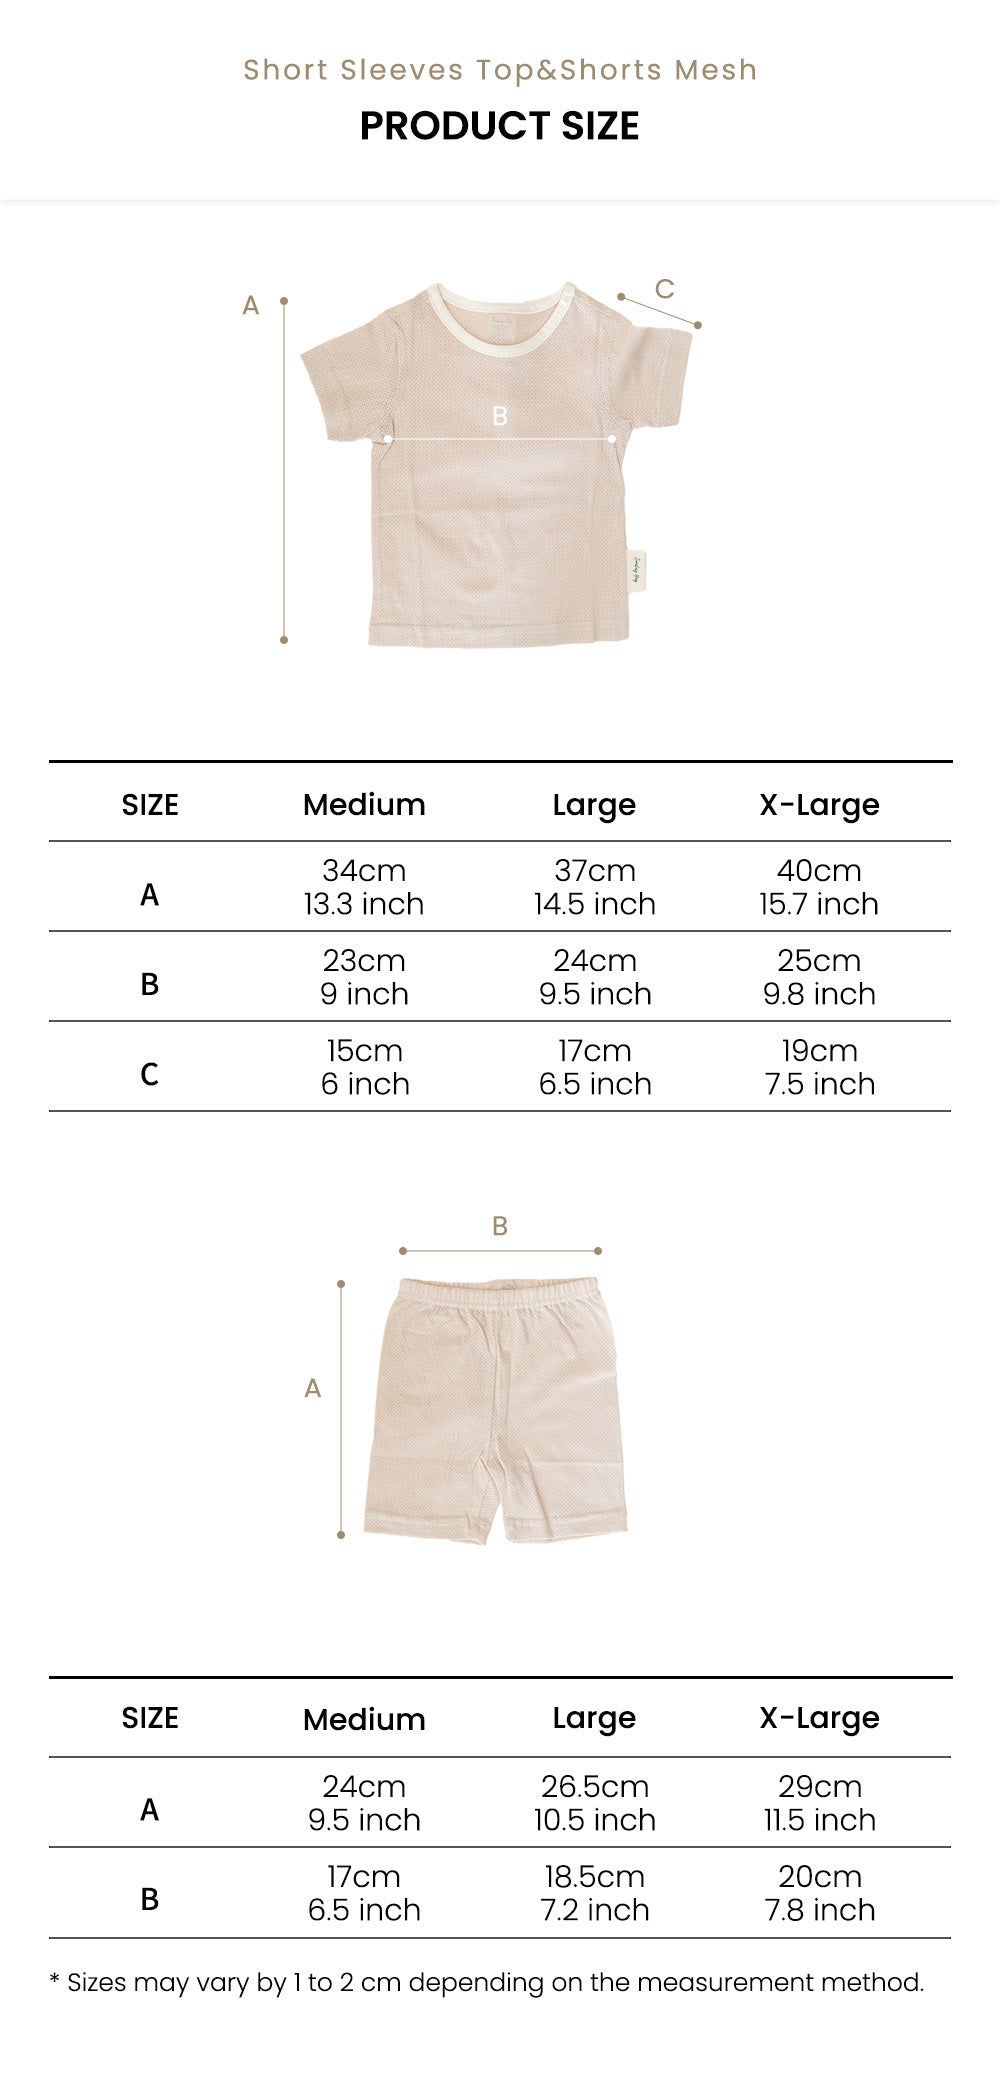 Baby Top and Shorts (Mesh) keeps your baby feeling fresh even during summer or hot weather condition.